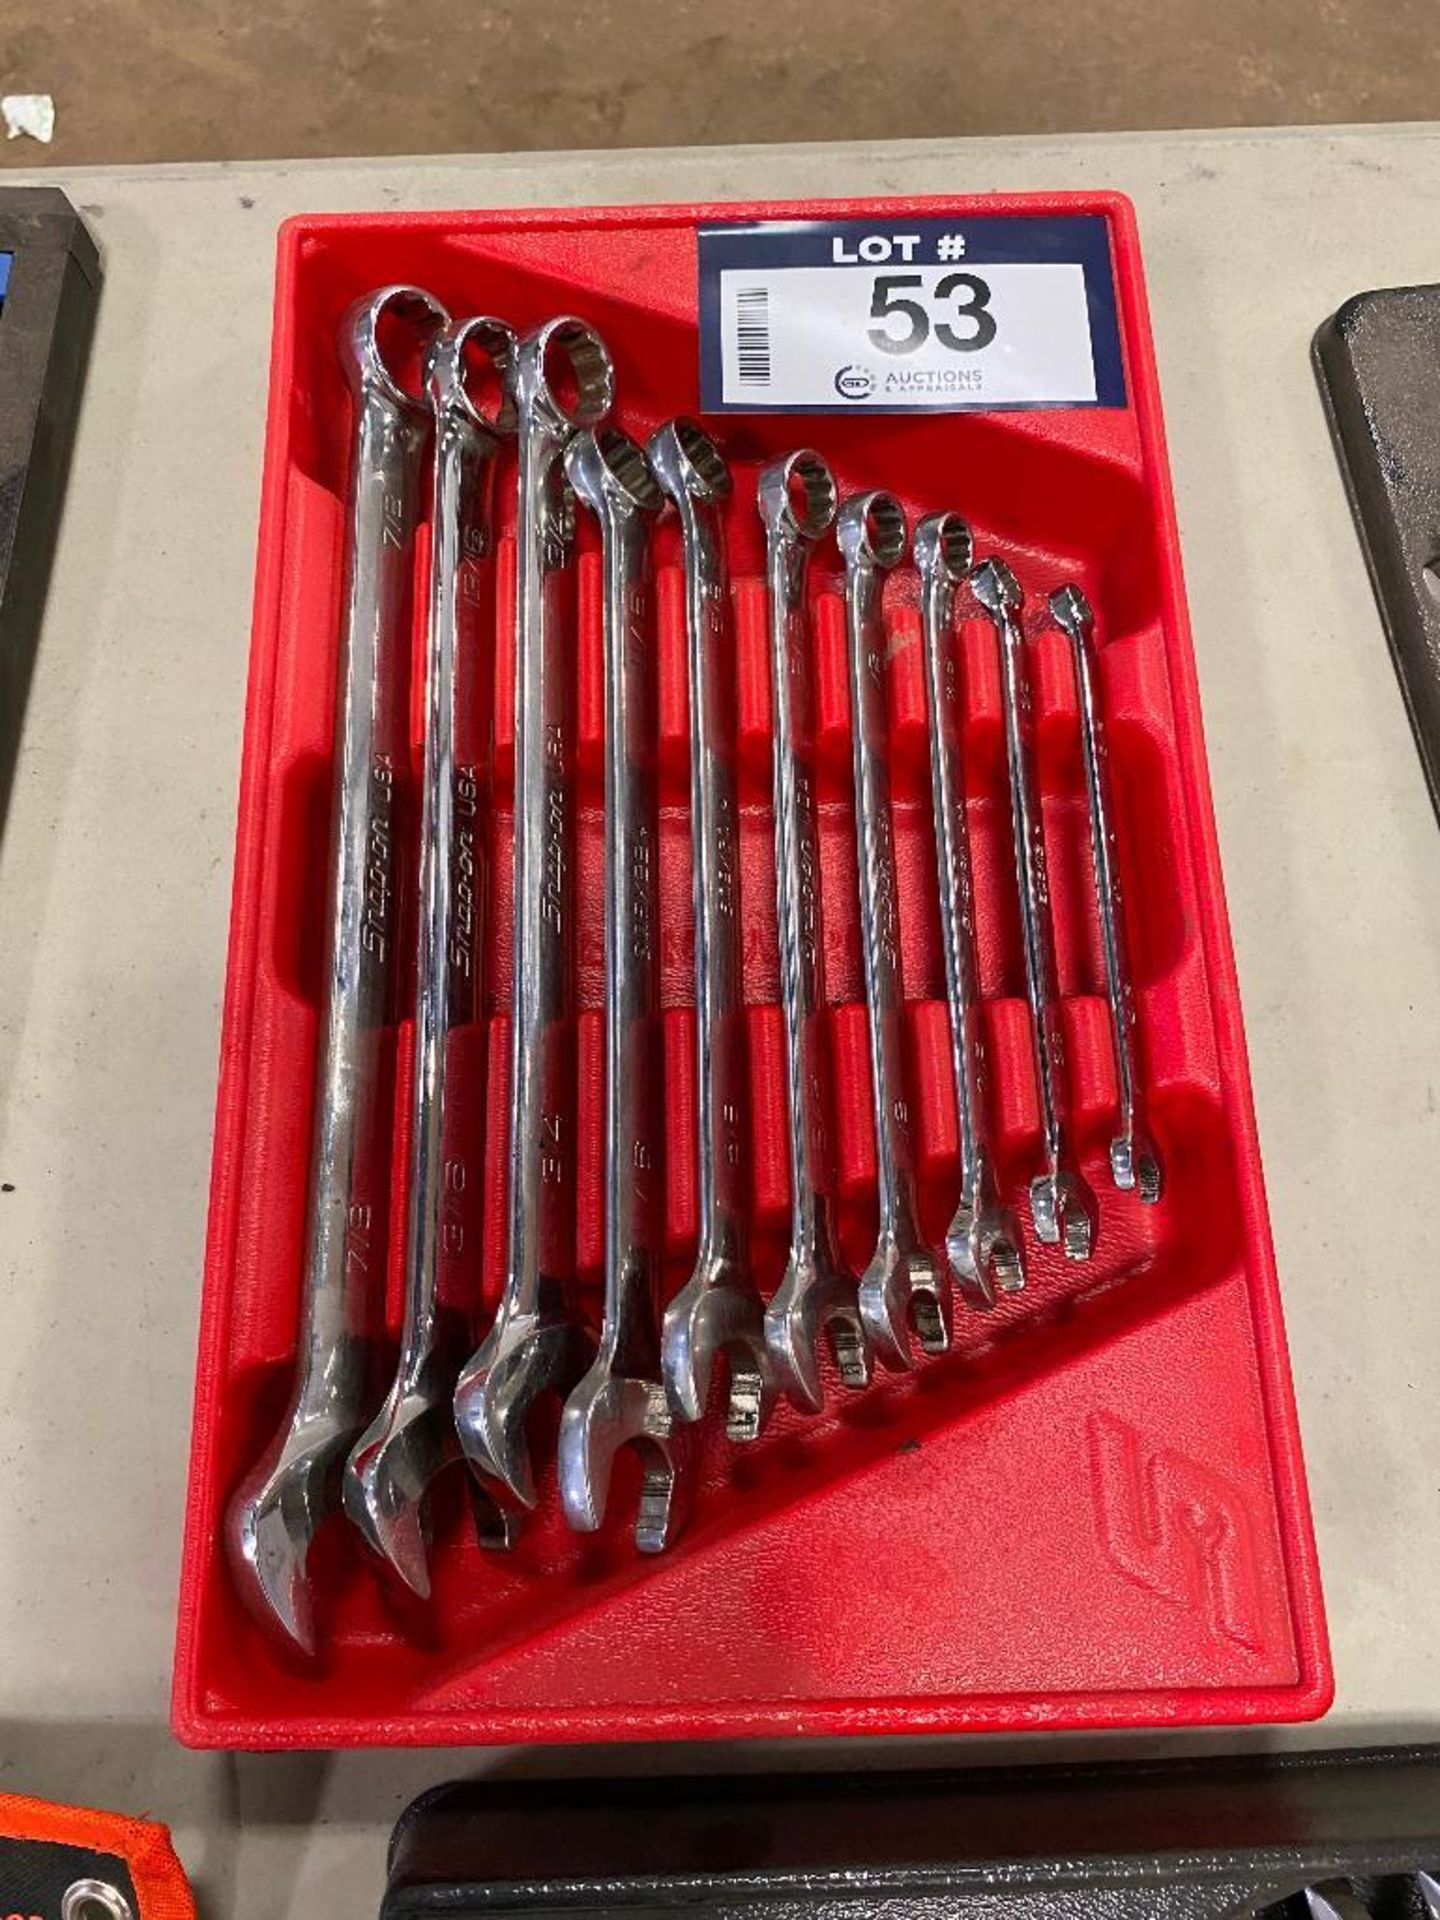 Snap-On SAE Wrench Set w/ Snap-On Tray - Image 2 of 3